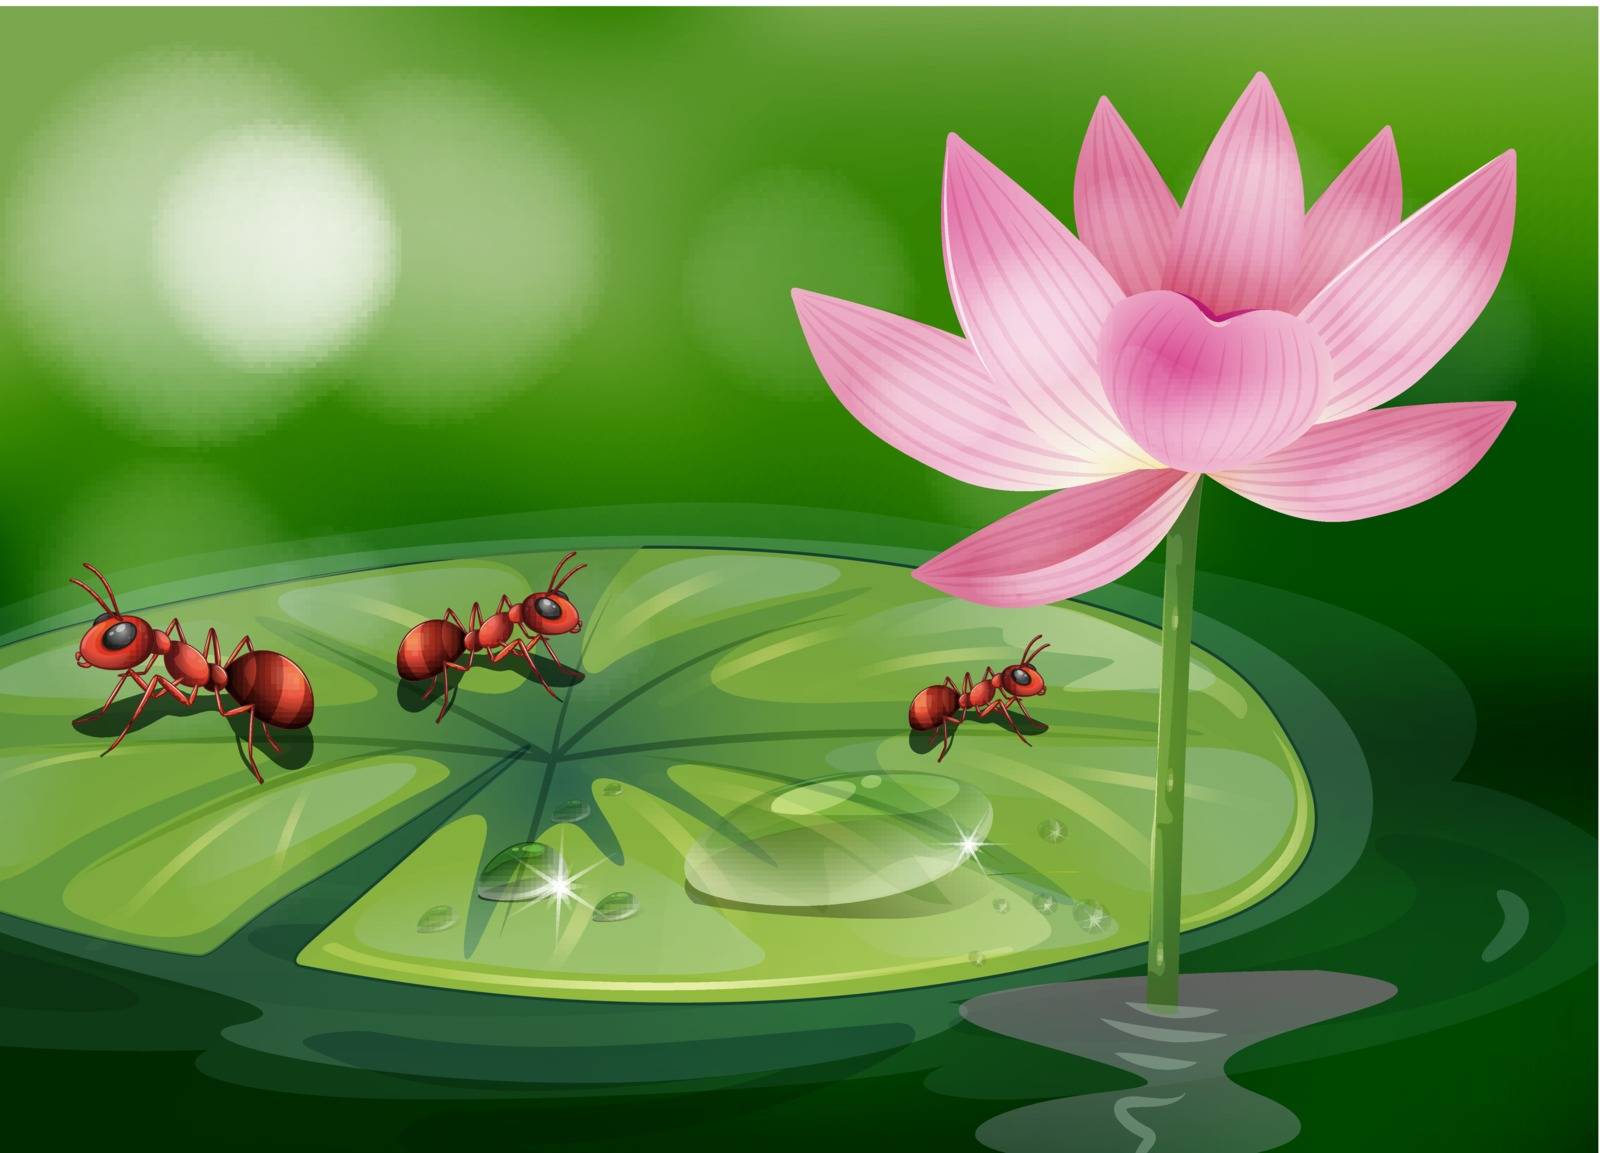 The three ants above the waterlily plant by iimages